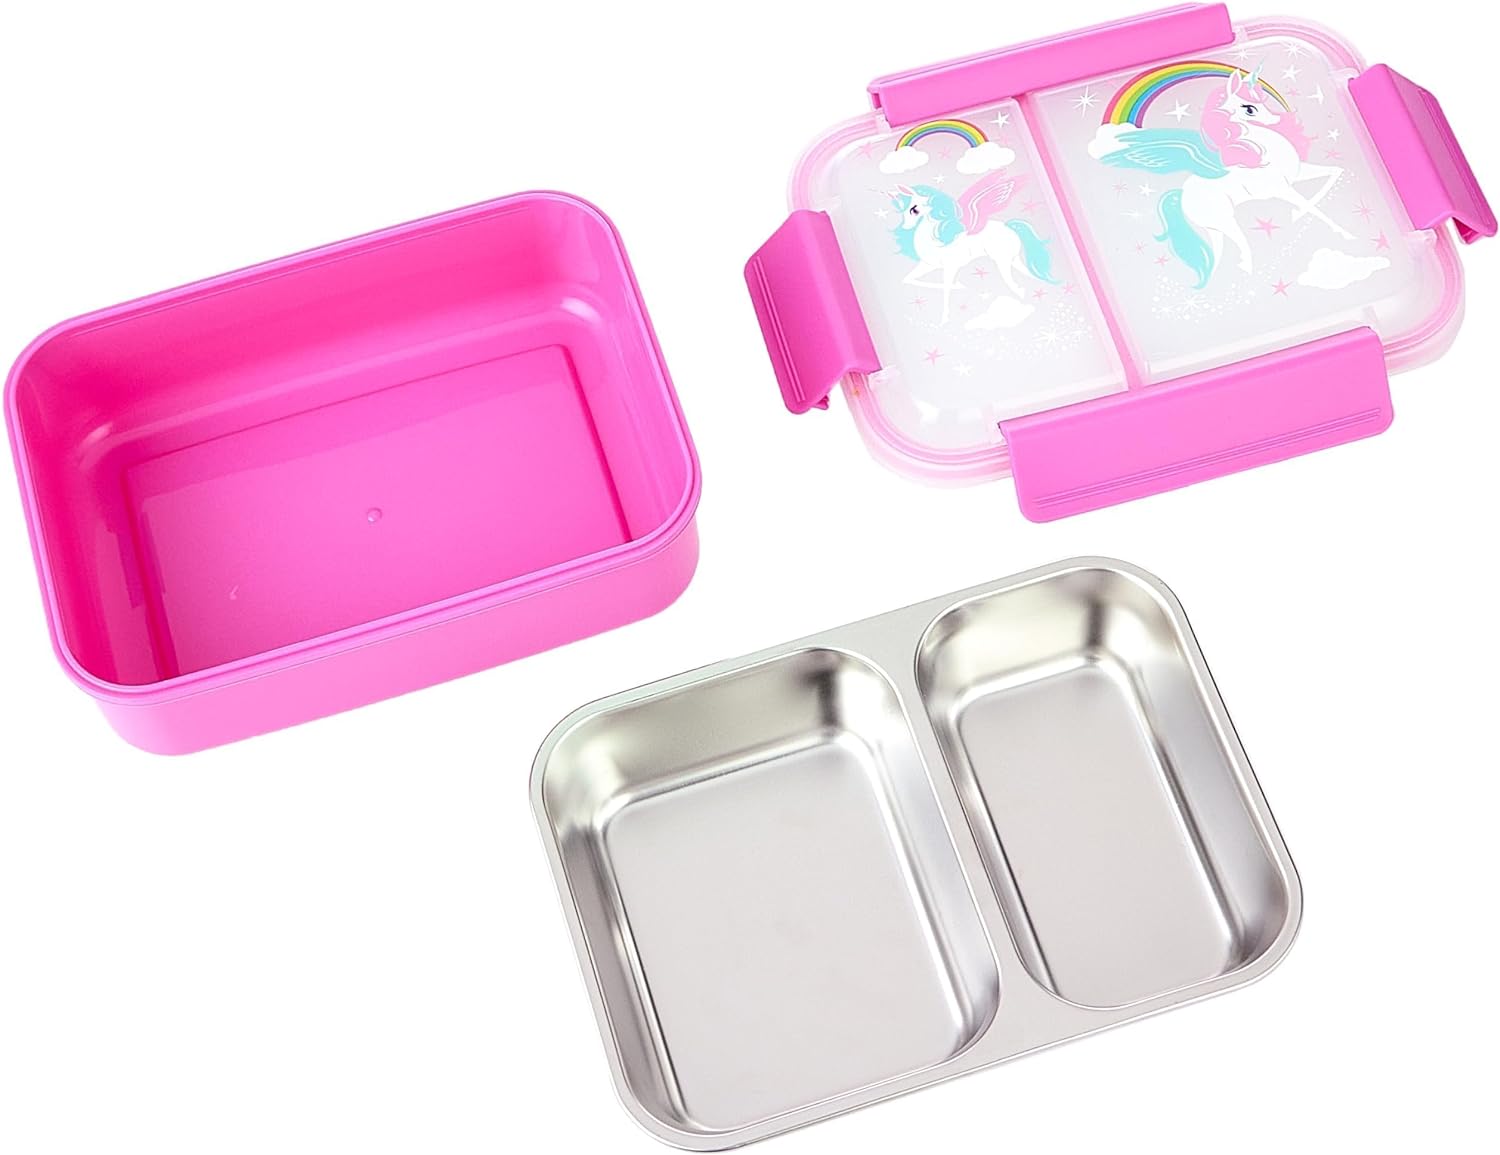 Sunveno Eazy Kids Steel Bento Insulated Lunch Box - Pink,Pack of 1